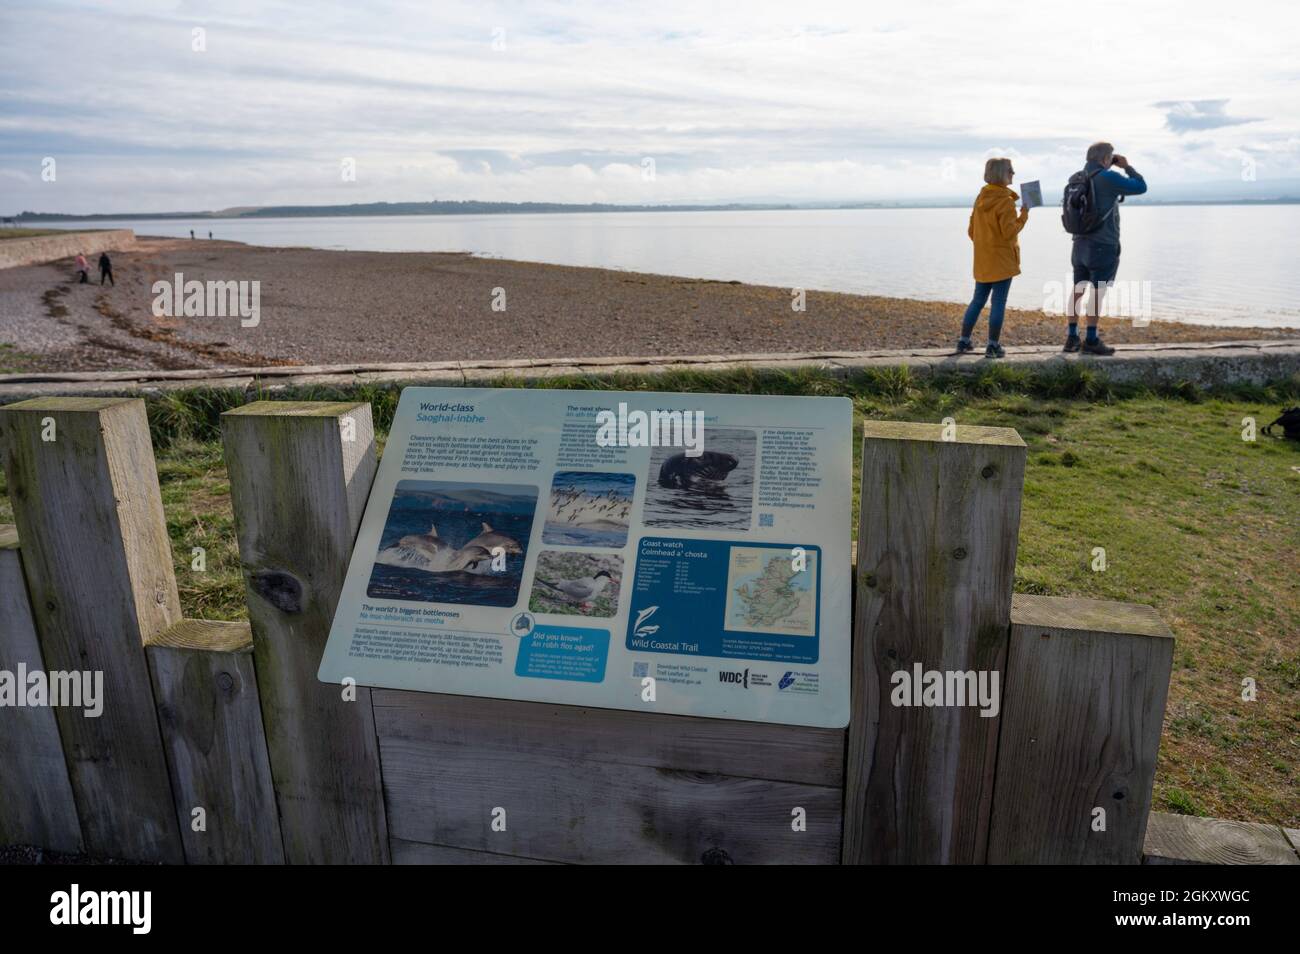 Information sign for dolphins and seals at a point famous for wildlife in Scotland. Blurred background of couple looking out to sea, beach and sea. Stock Photo